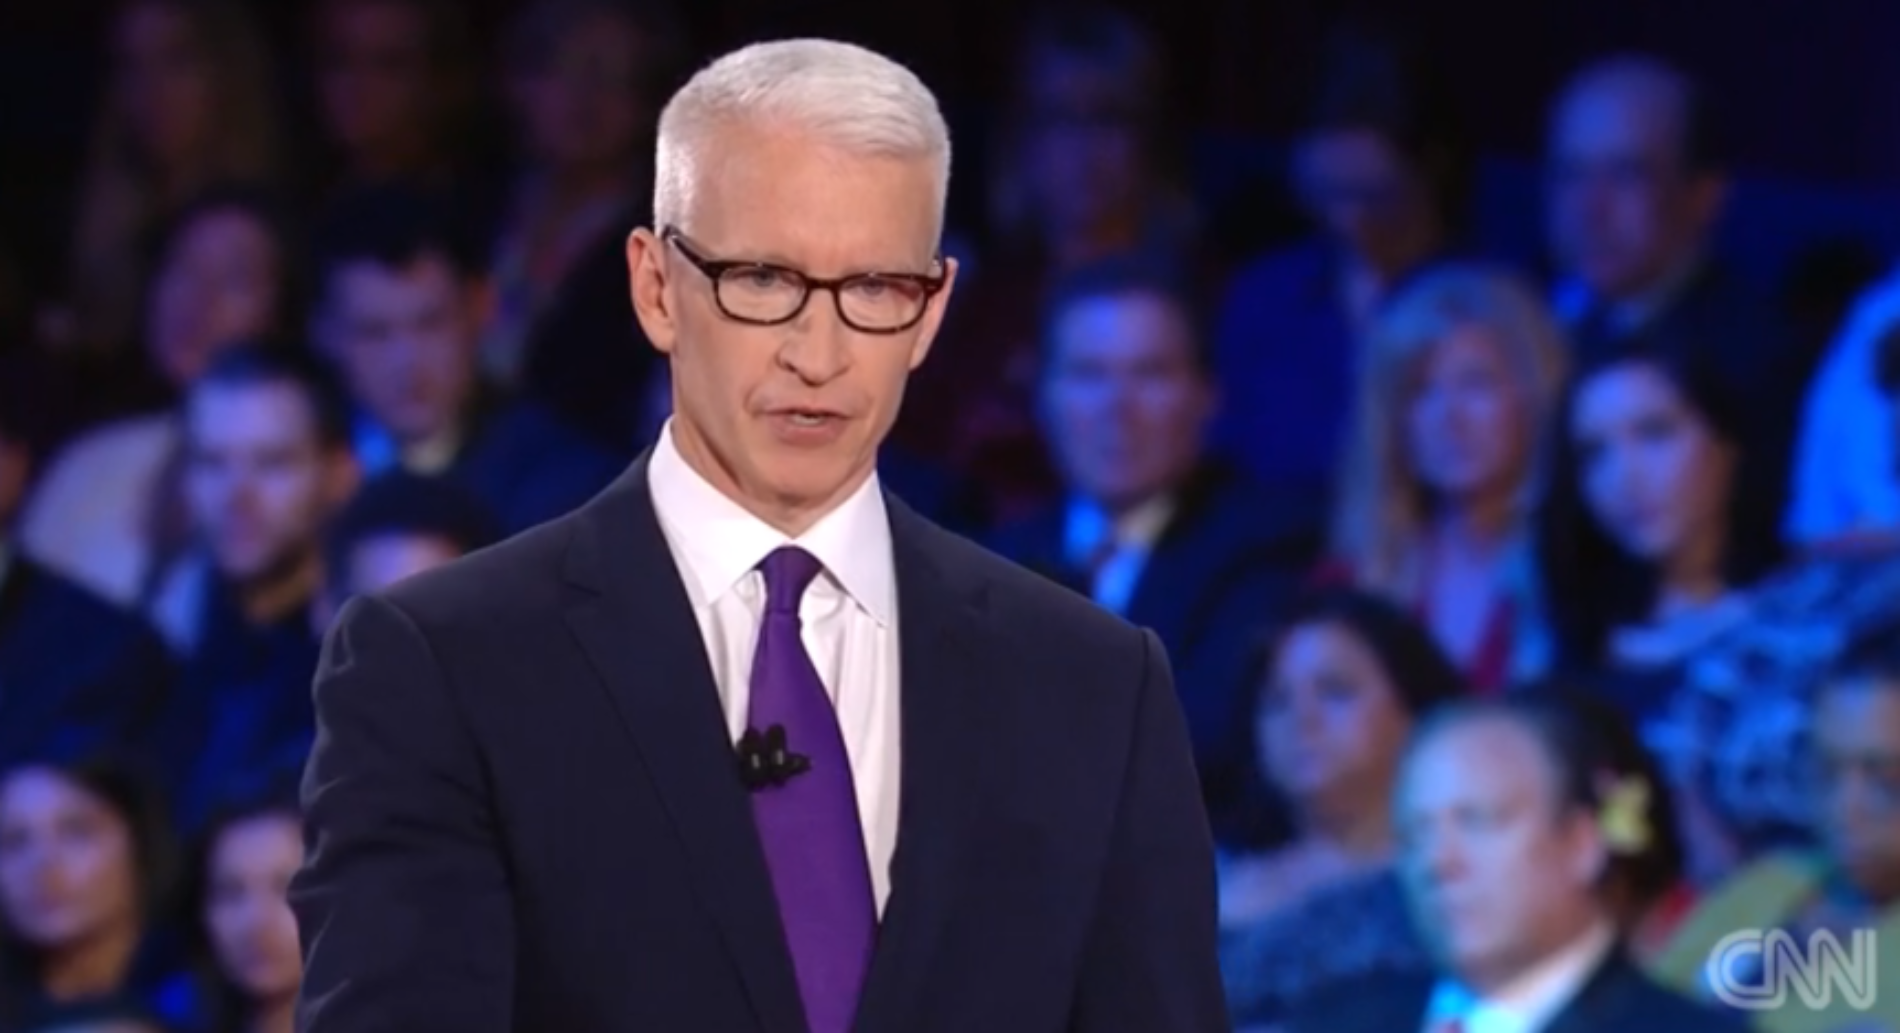 Anderson Cooper attacked over Second US Presidential Debate